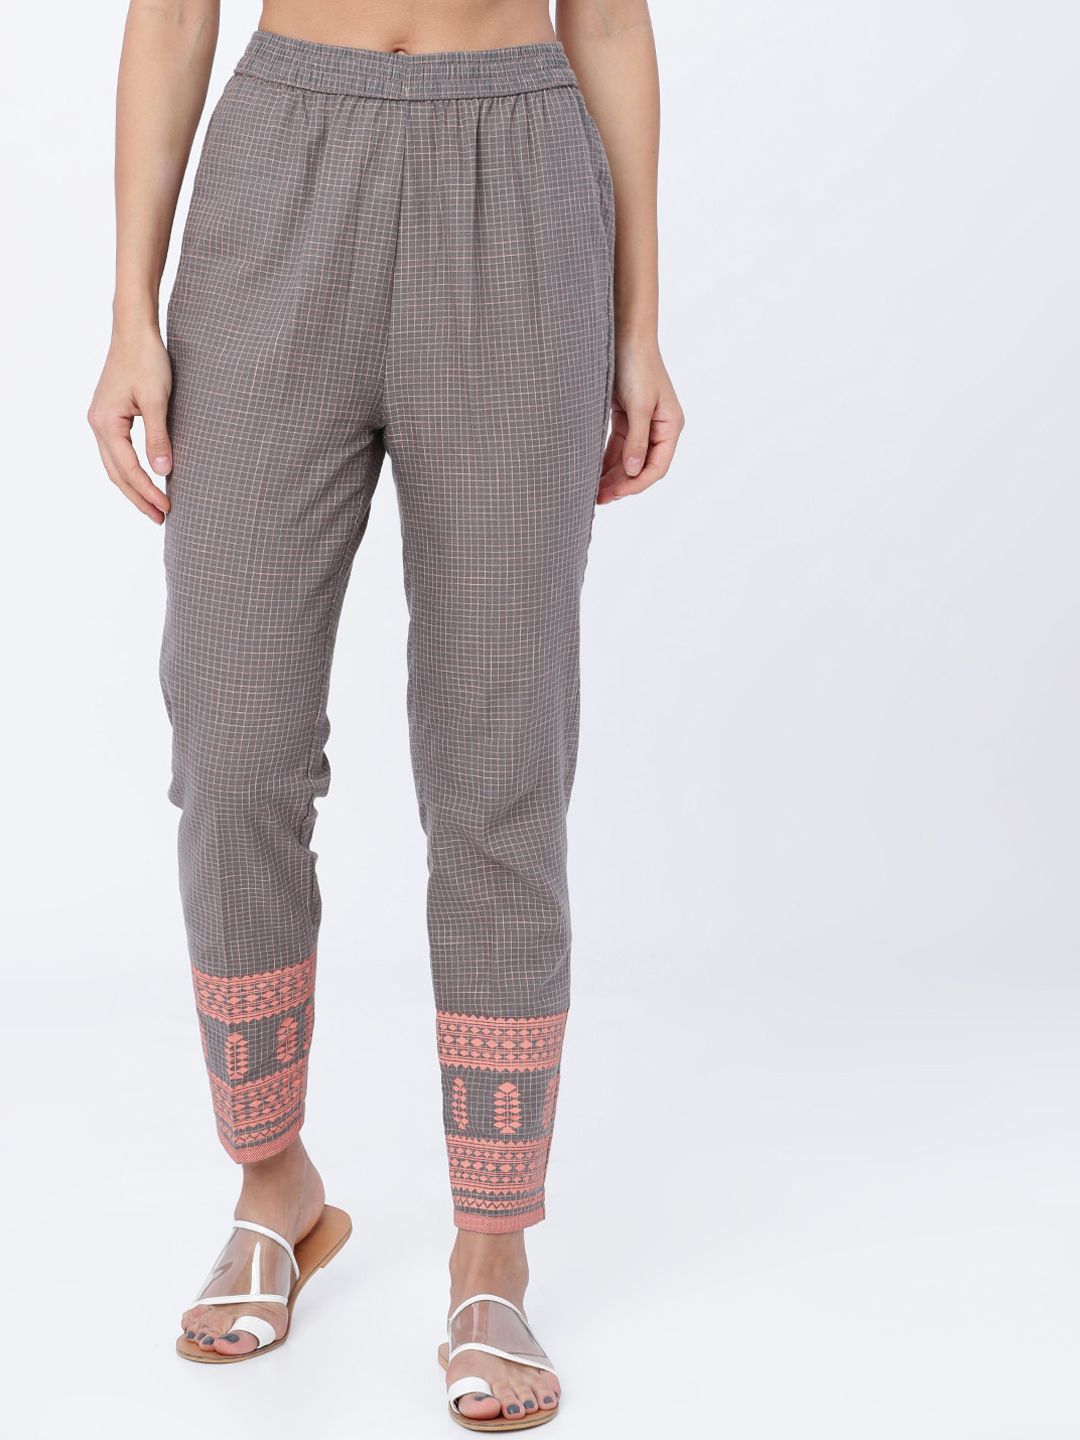 Vishudh Women Grey & Pink Regular Fit Checked Peg Trousers Price in India